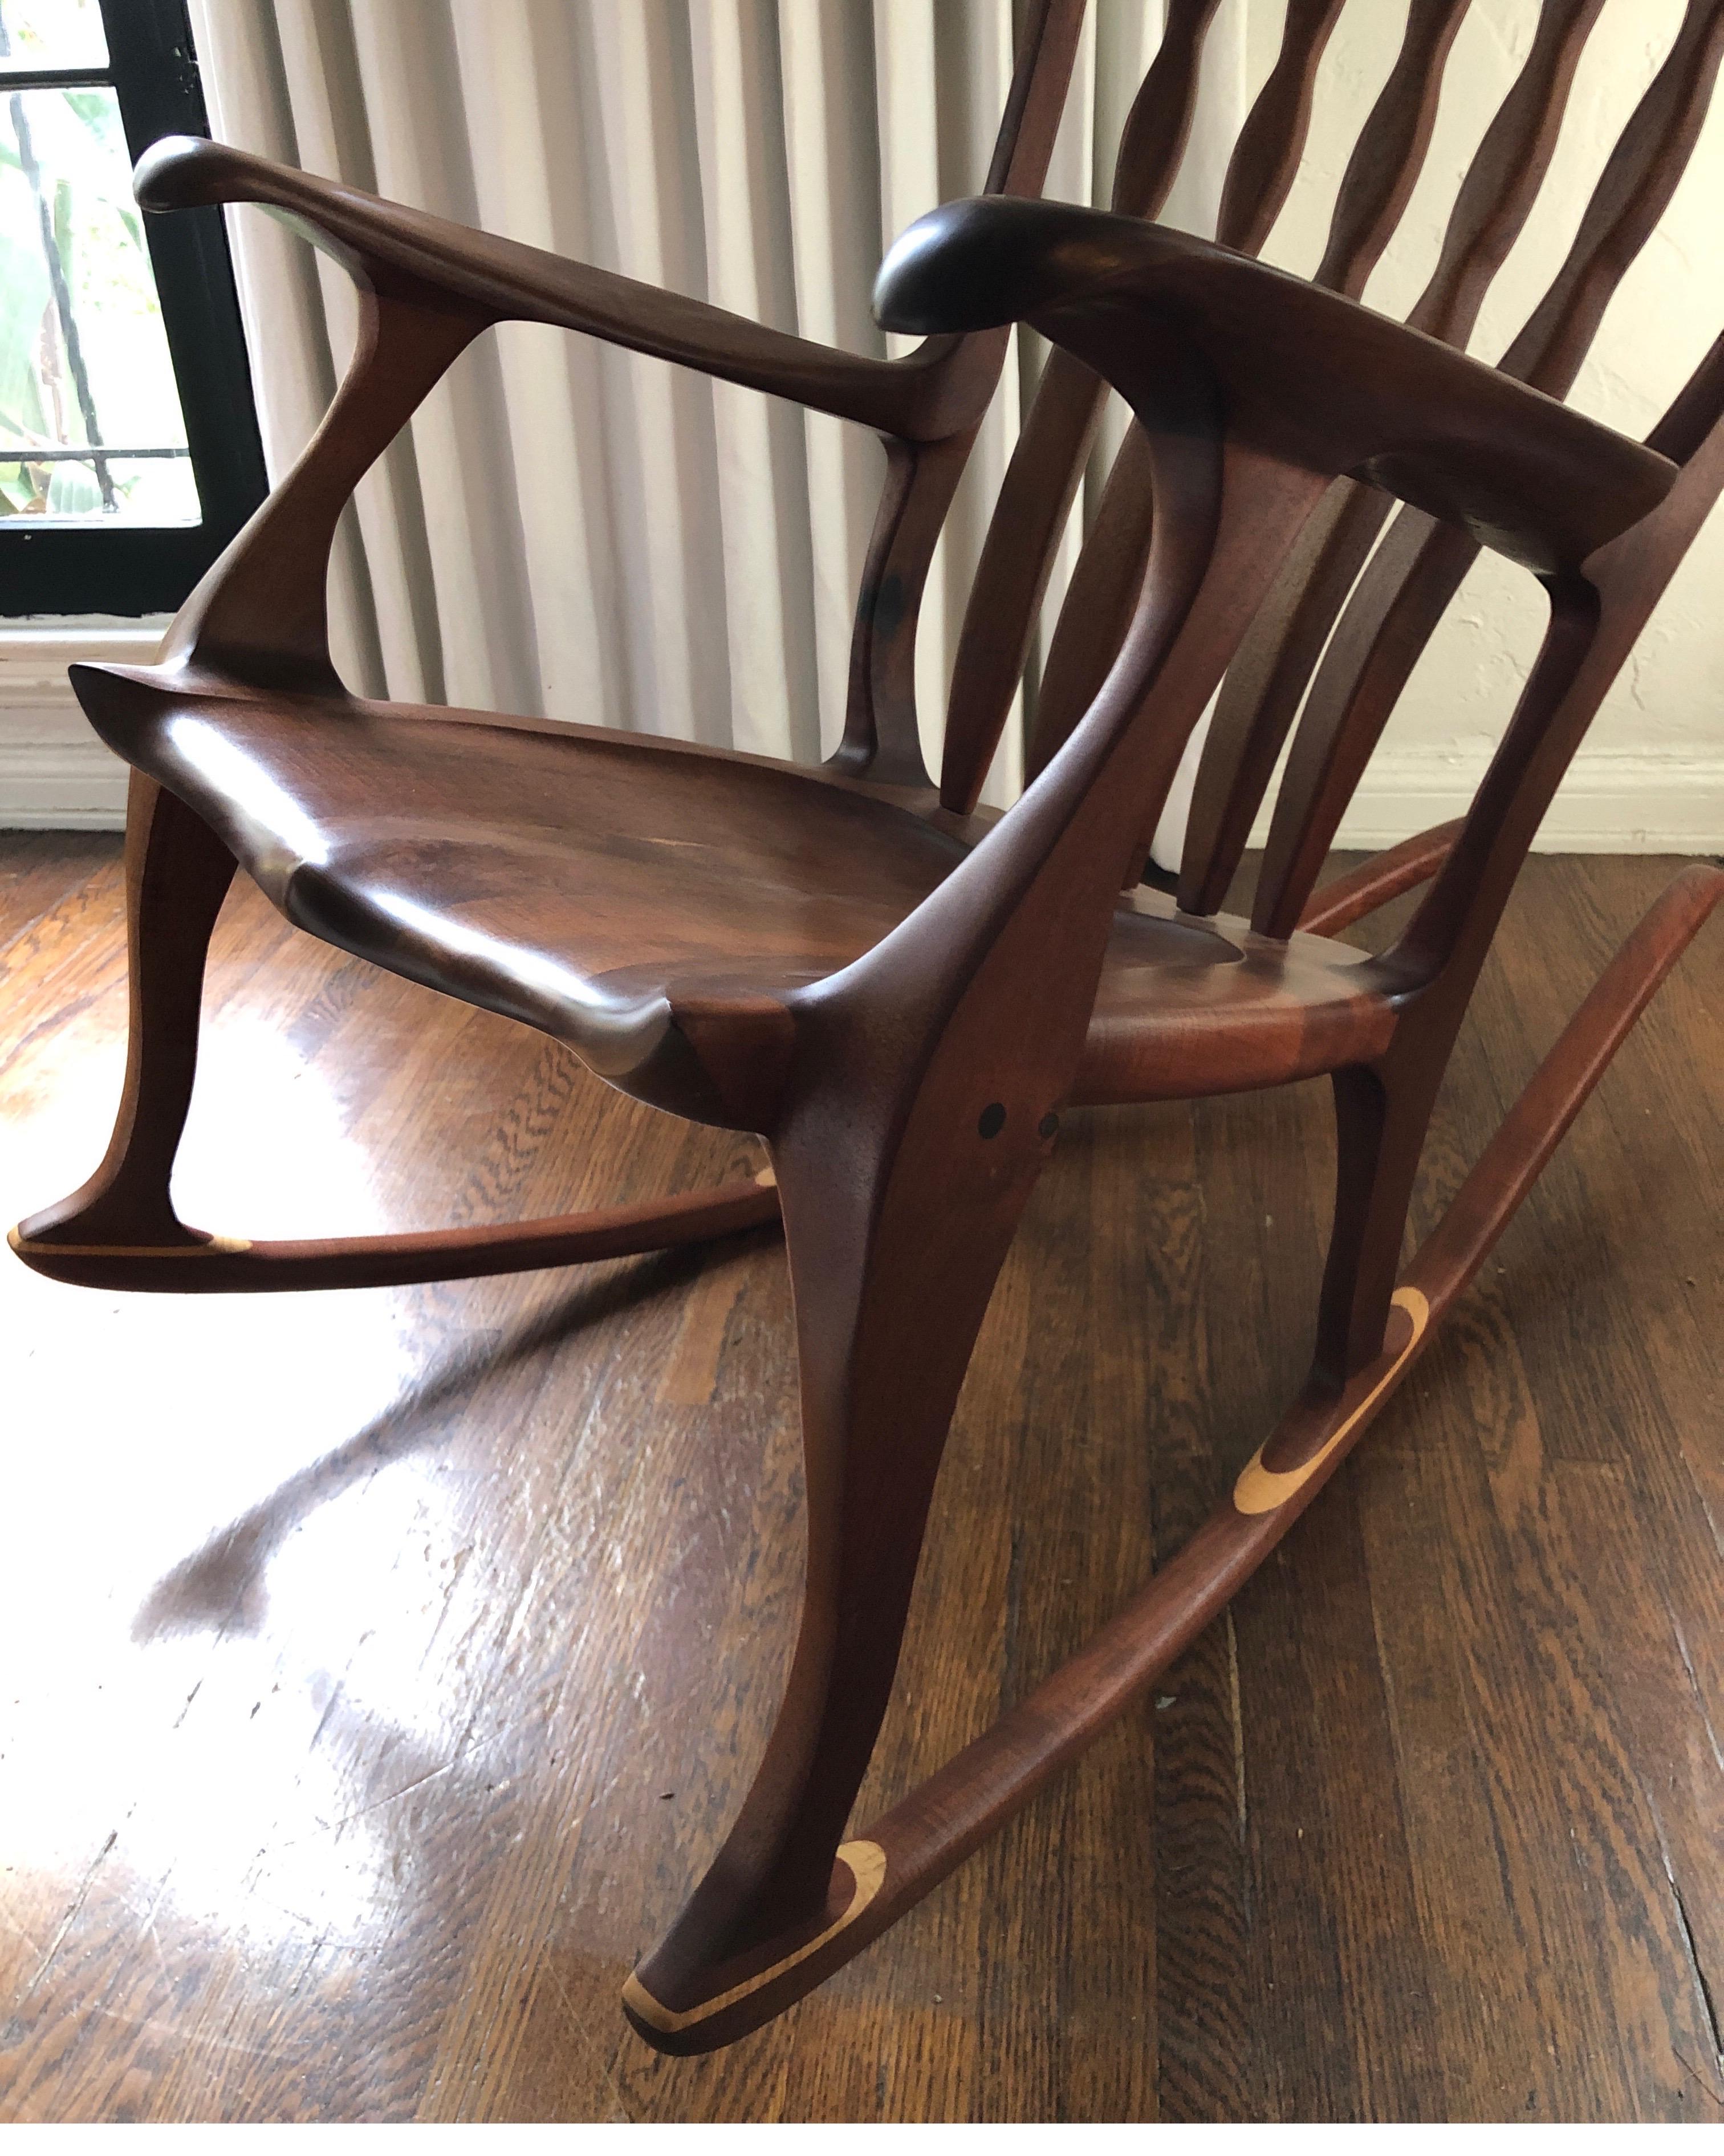 Hand-Crafted Sam Maloof Style Mid-Century Modern Rocking Chair, Signed Bill Kappel